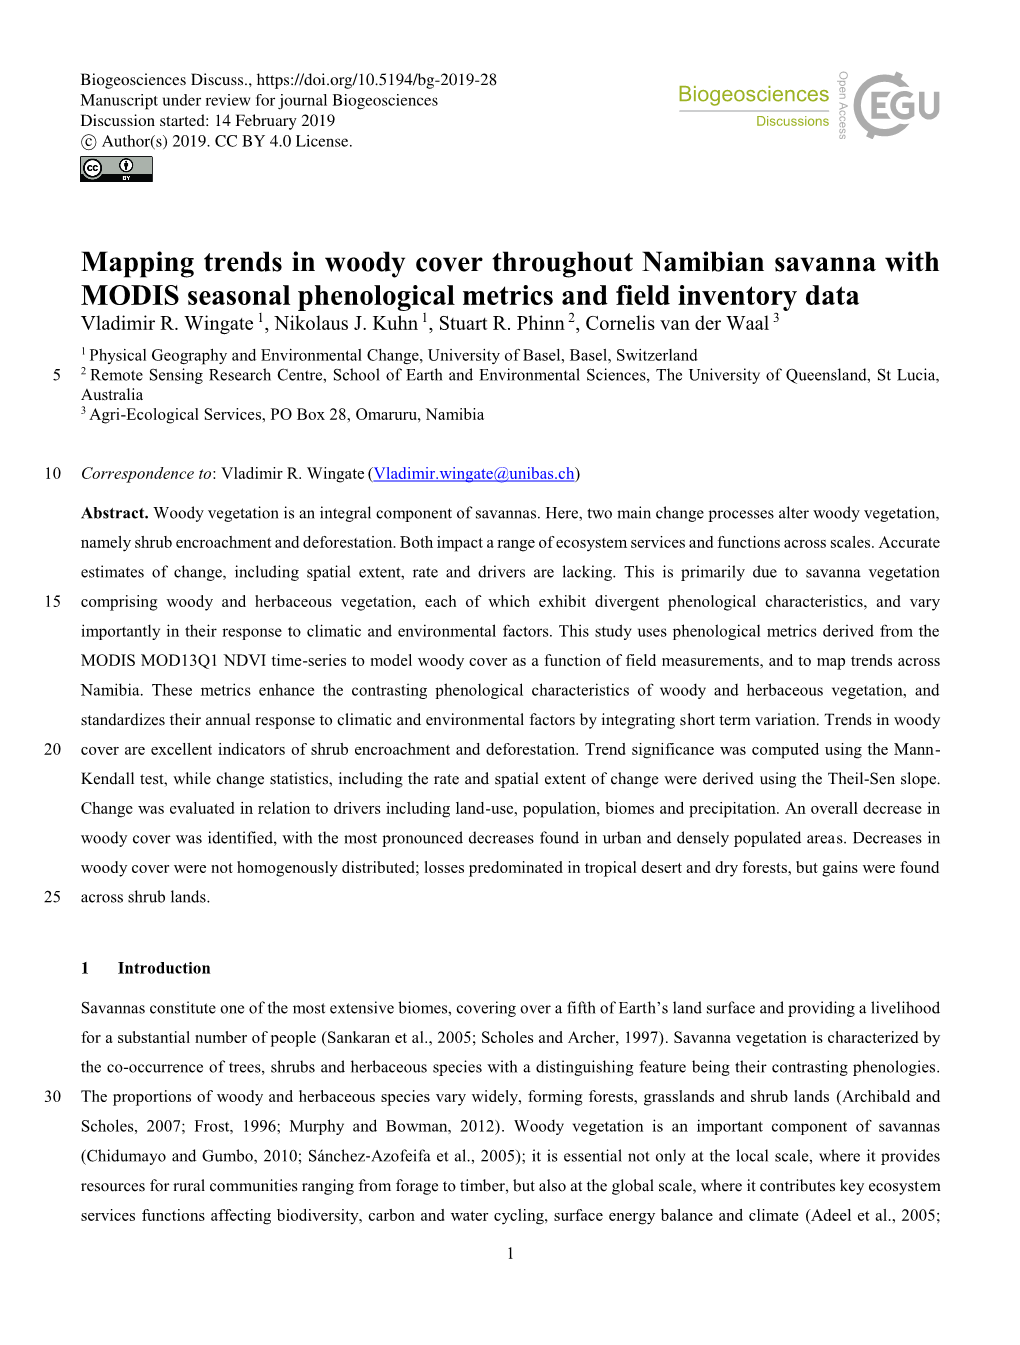 Mapping Trends in Woody Cover Throughout Namibian Savanna with MODIS Seasonal Phenological Metrics and Field Inventory Data Vladimir R